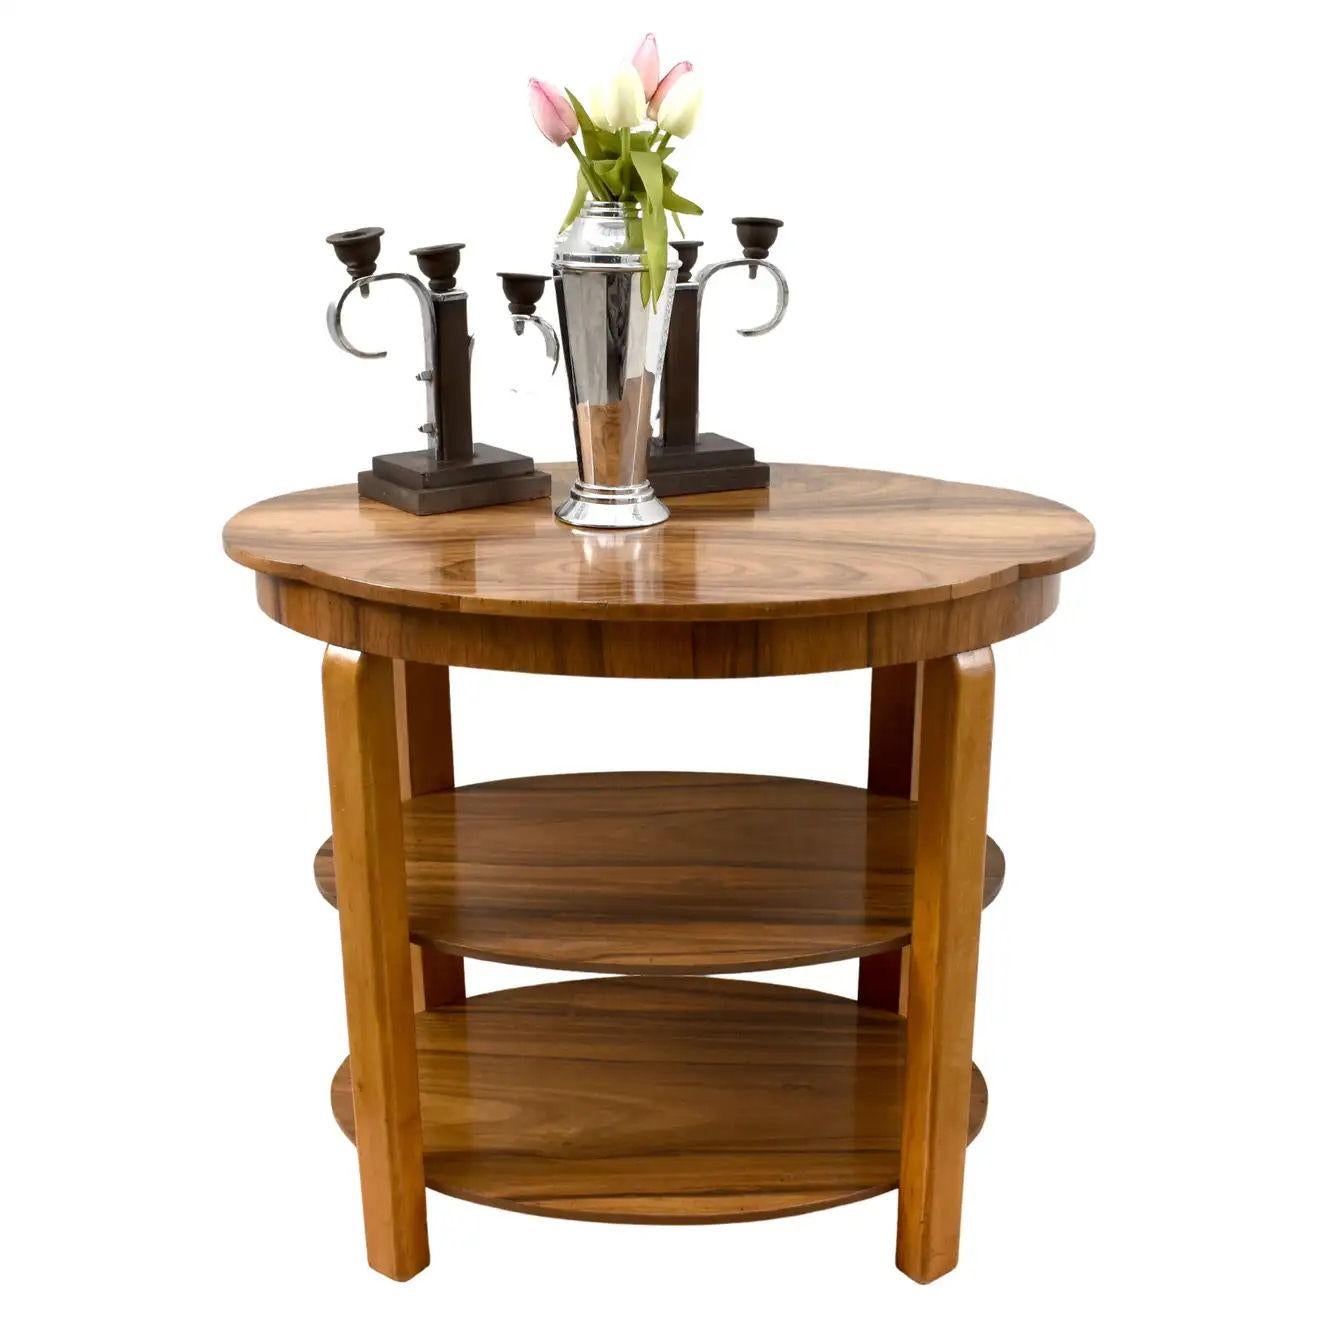 For your consideration is this rather stylish Art Deco English walnut book table dating to the 1930s with three tier shelves. A very fine example that can be used for multiple purposes, a center, end, coffee table. Fabulous quality with figured